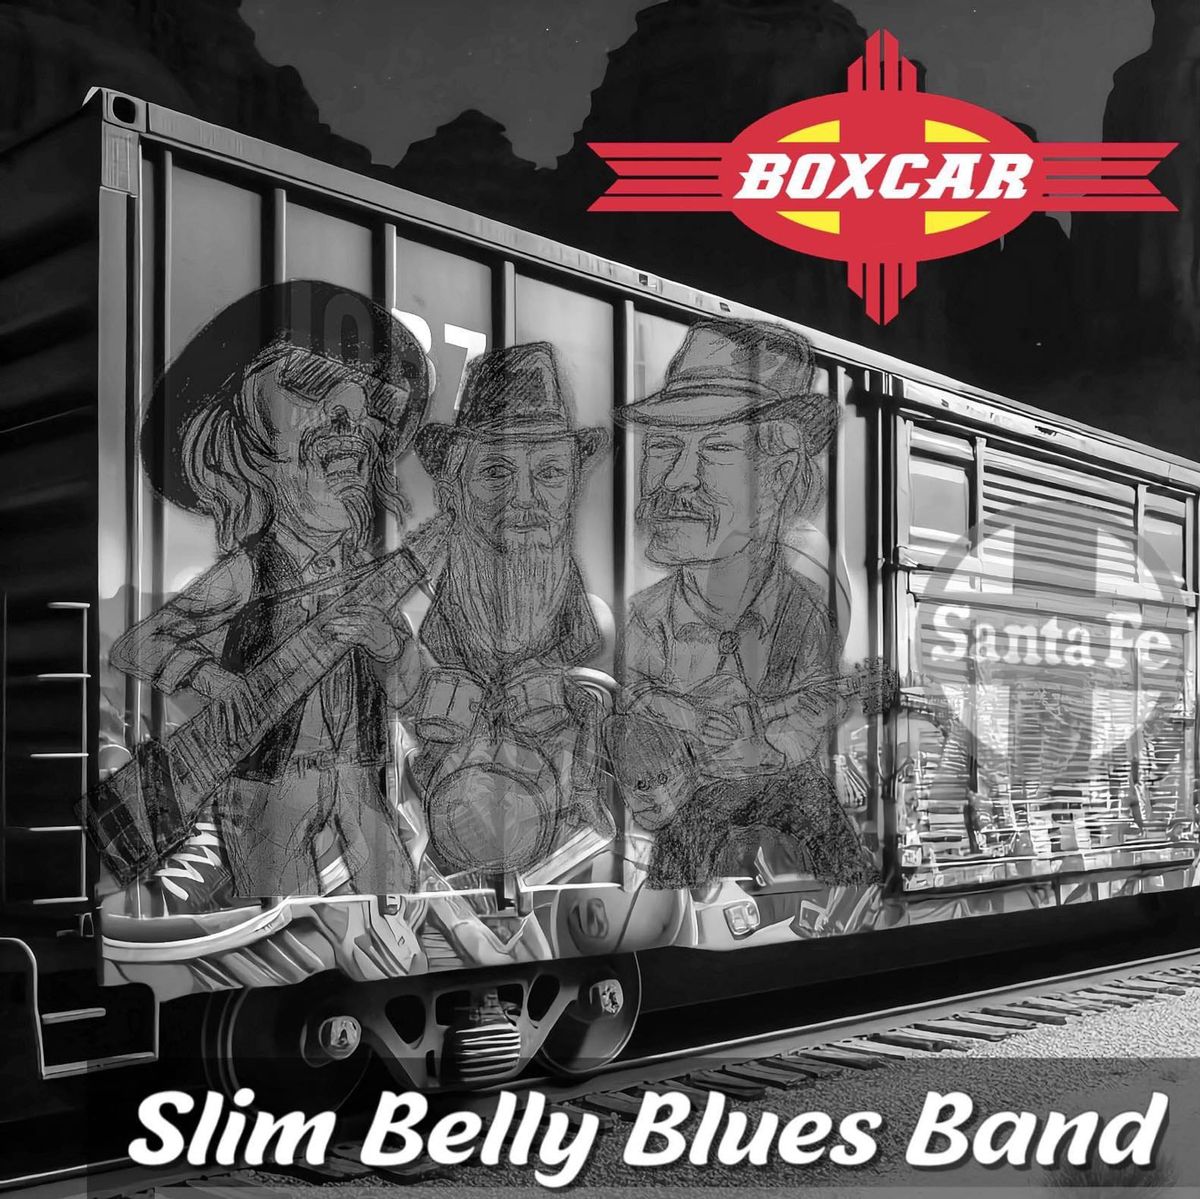 NEW DATE!! Slim Belly Blues at Boxcar!